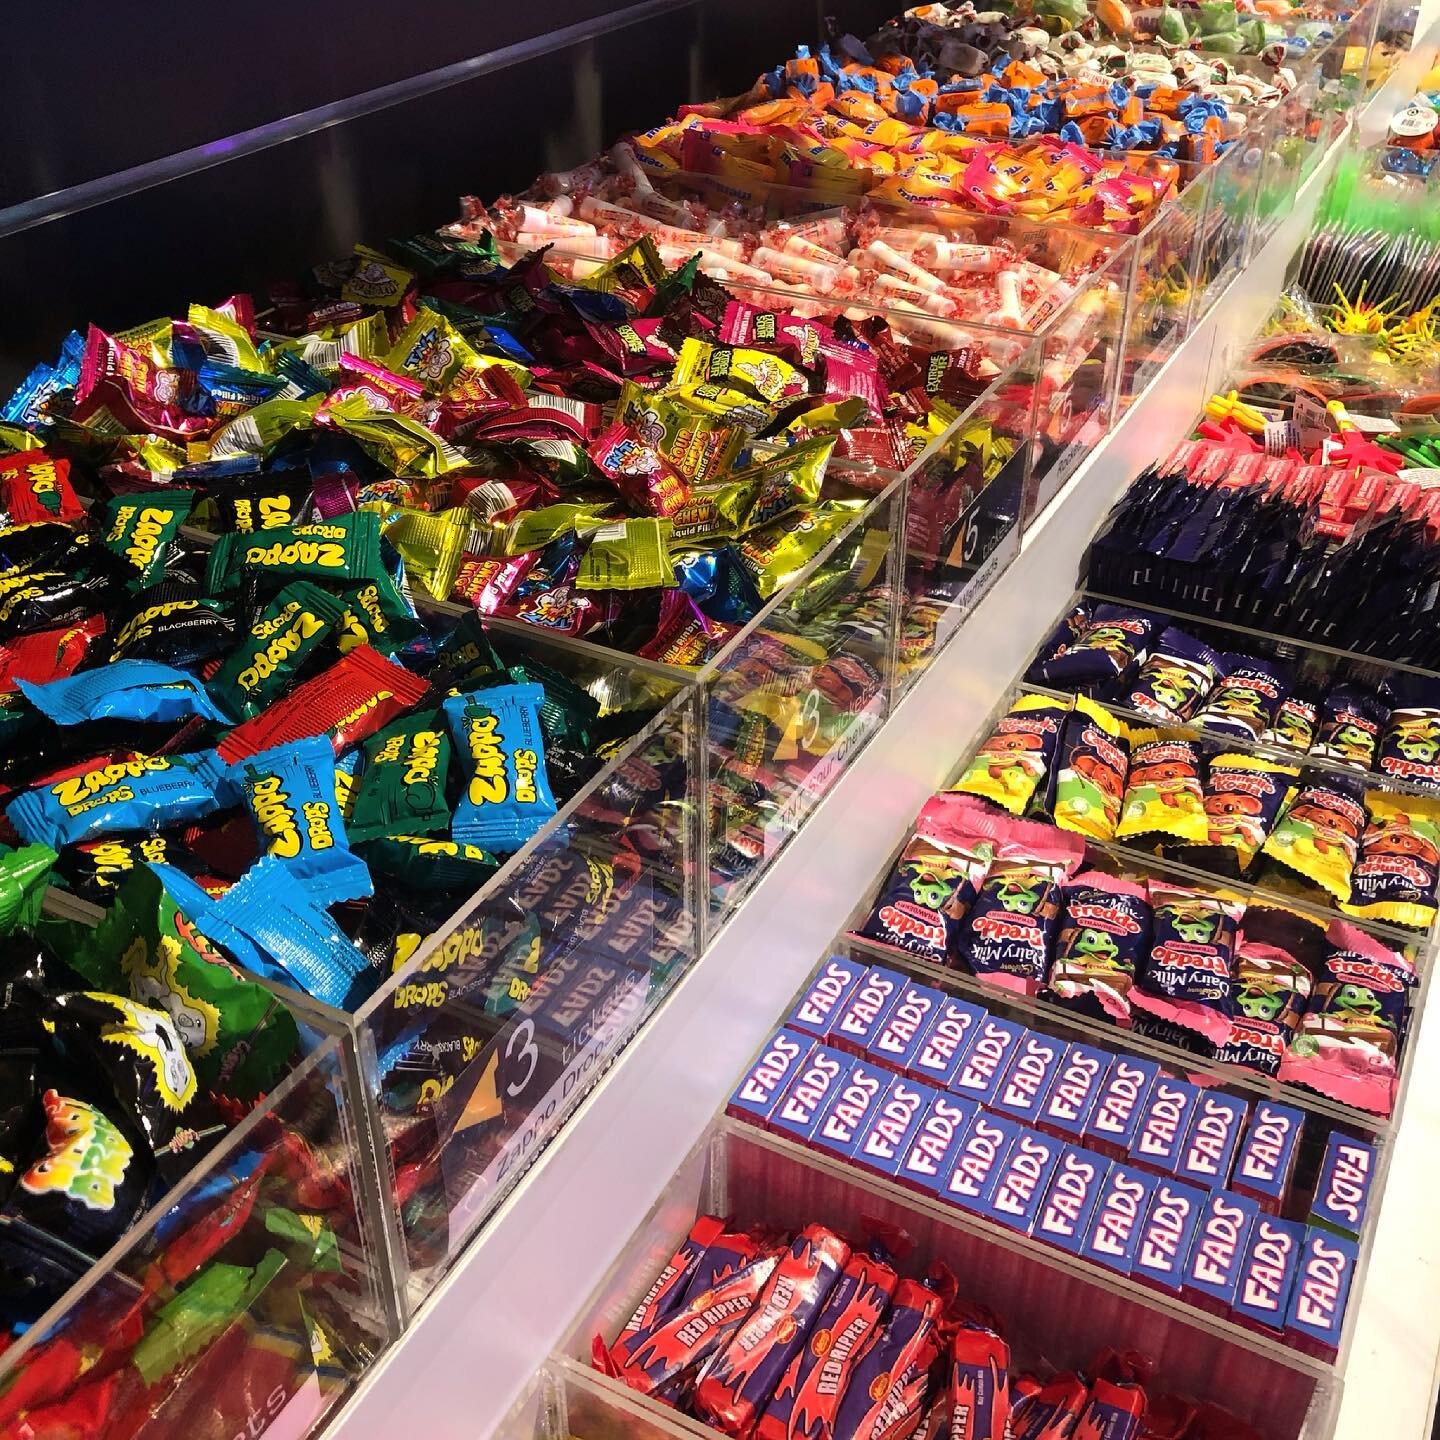 Have a sweet time with us at Totally Game Southland !! 

Always stocking the best treats for you to choose as prizes 🍬🍫🍭
.
.
.
.
#prizes #treats #arcade #fun #family